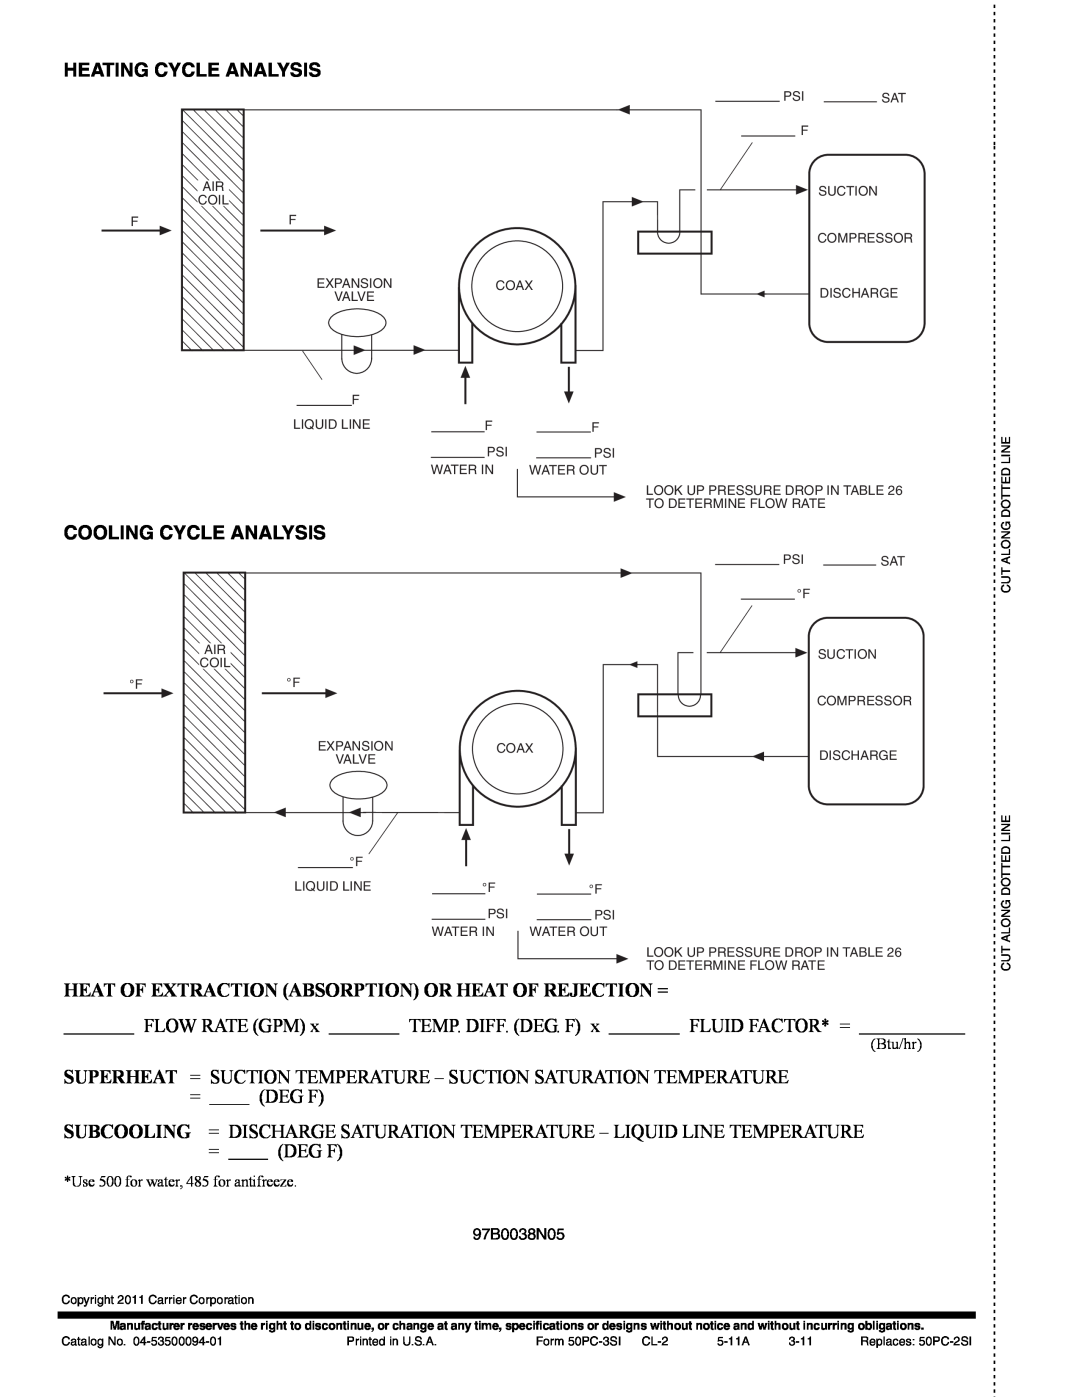 Carrier 50PCH Heating Cycle Analysis, Cooling Cycle Analysis, Fluid Factor* =, a50-8445, a50-8446, 97B0038N05 